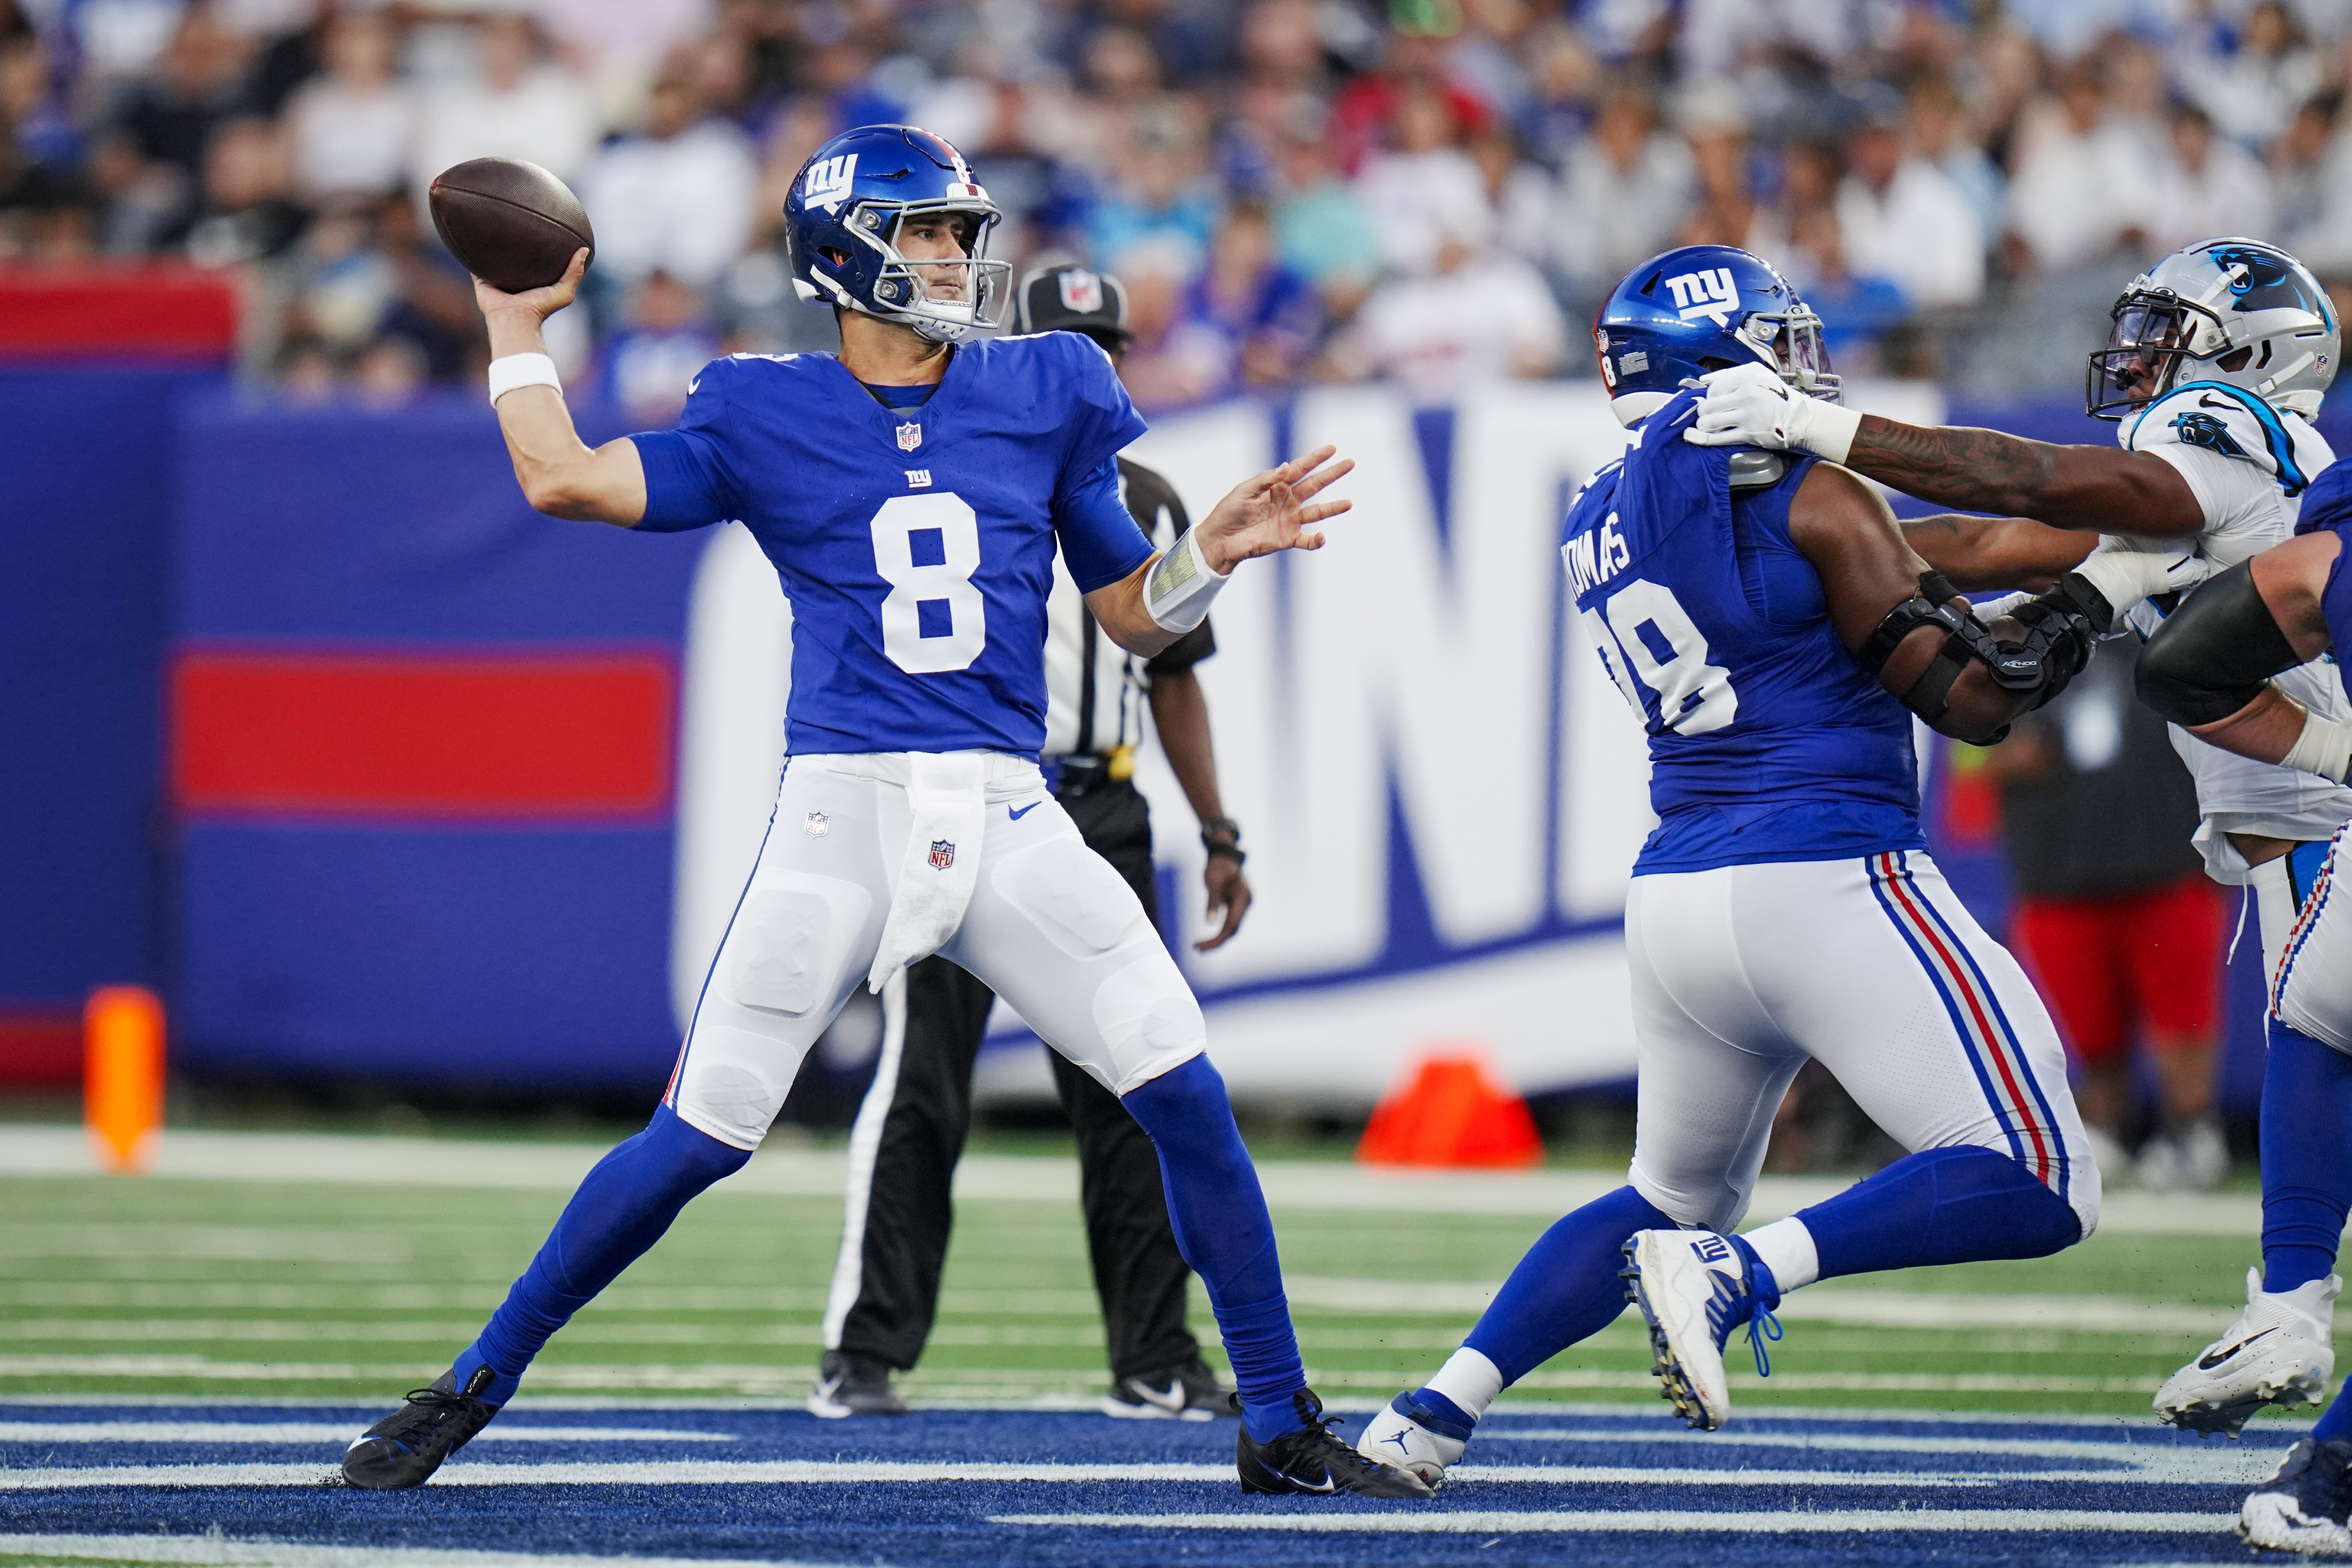 ny giants game today streaming live